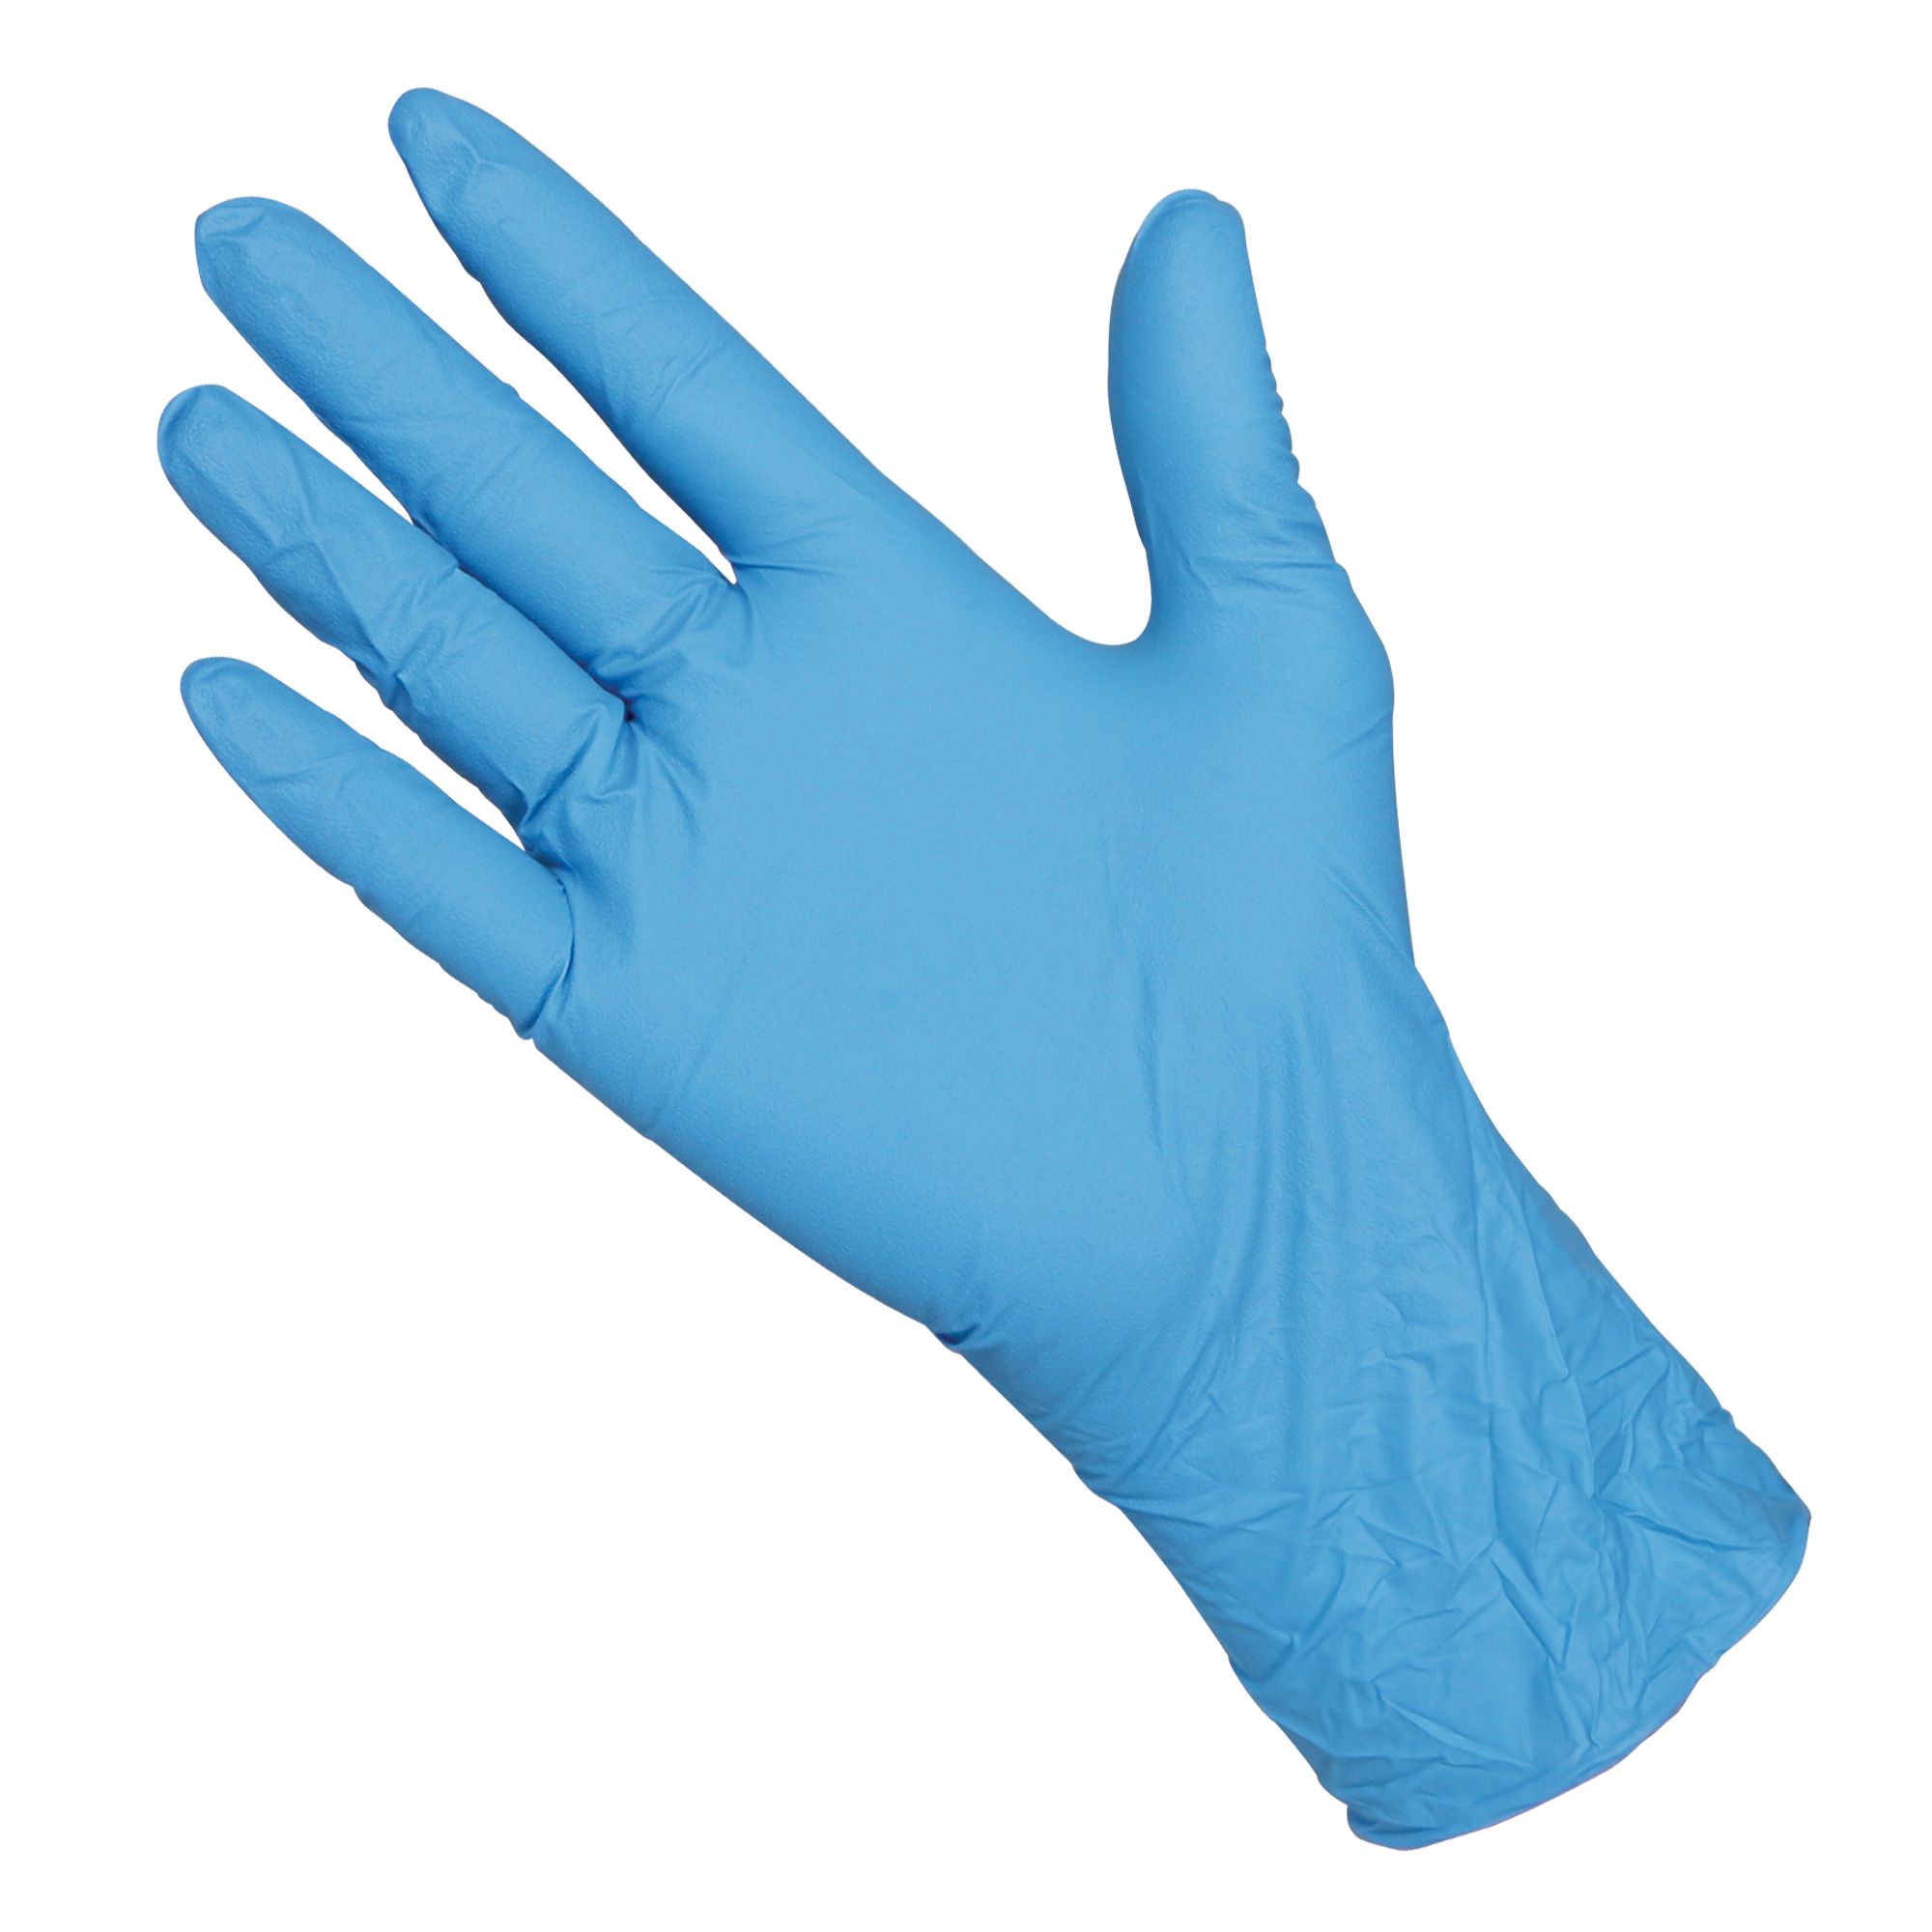 FREE MASK 4 Mil Thick Details about   Gloves Nitrile 10-100 Pcs Powder Free - Latex Free 